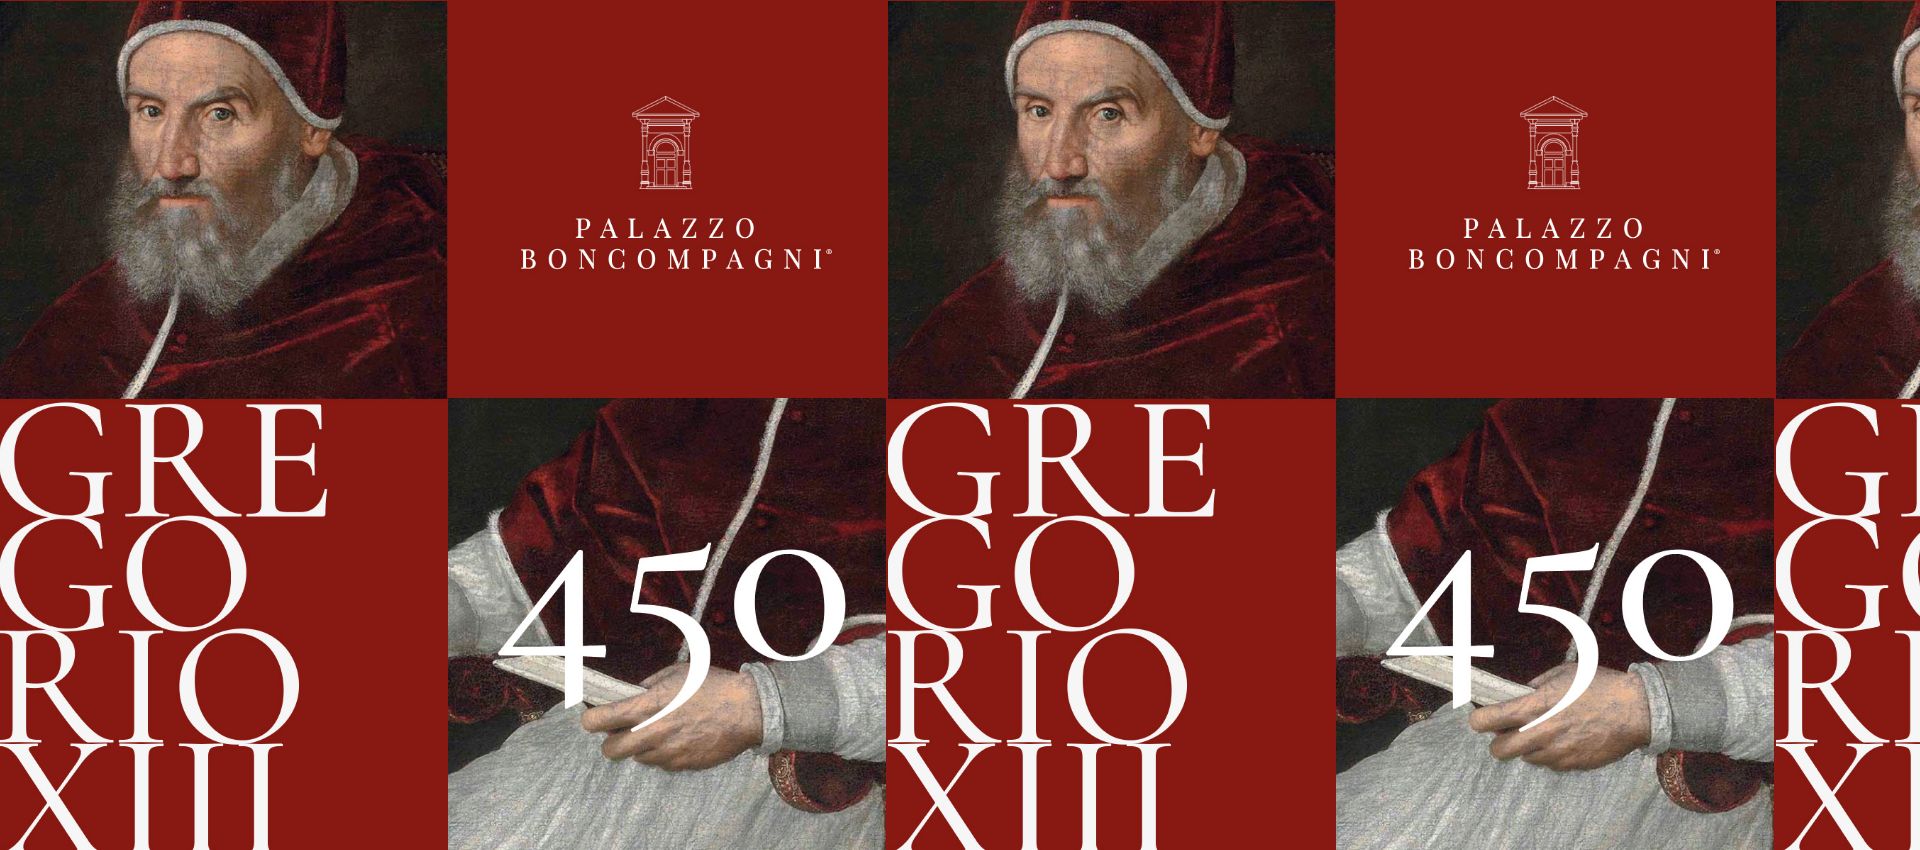 <p>May 2022</p>
<h2> 450 years<br />
of Pope Gregory XIII</h2>
<h3>1572-2022</h3>
